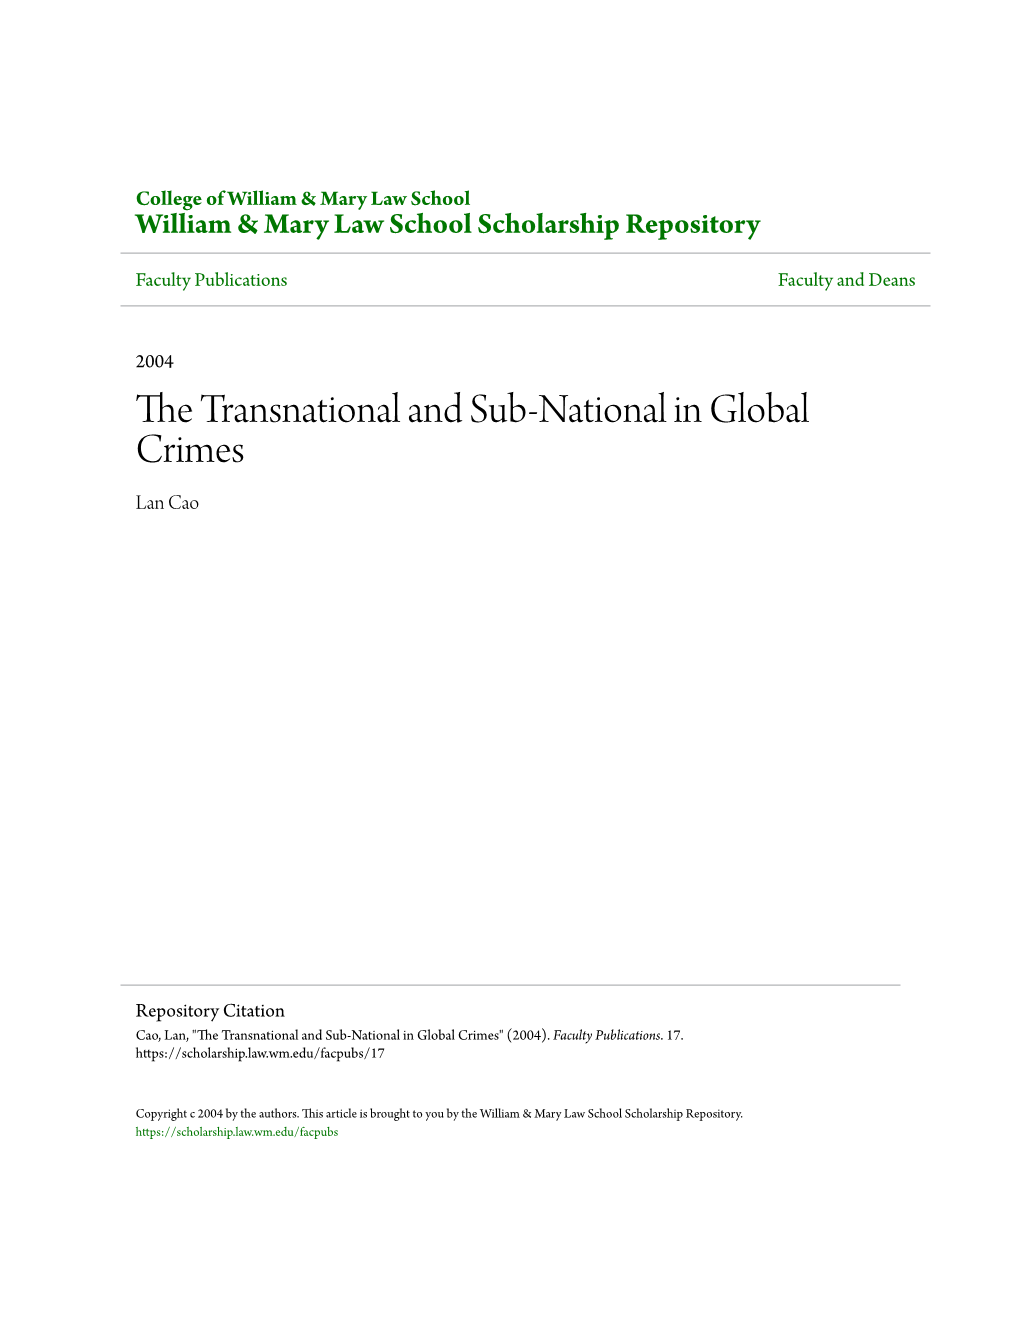 The Transnational and Sub-National in Global Crimes